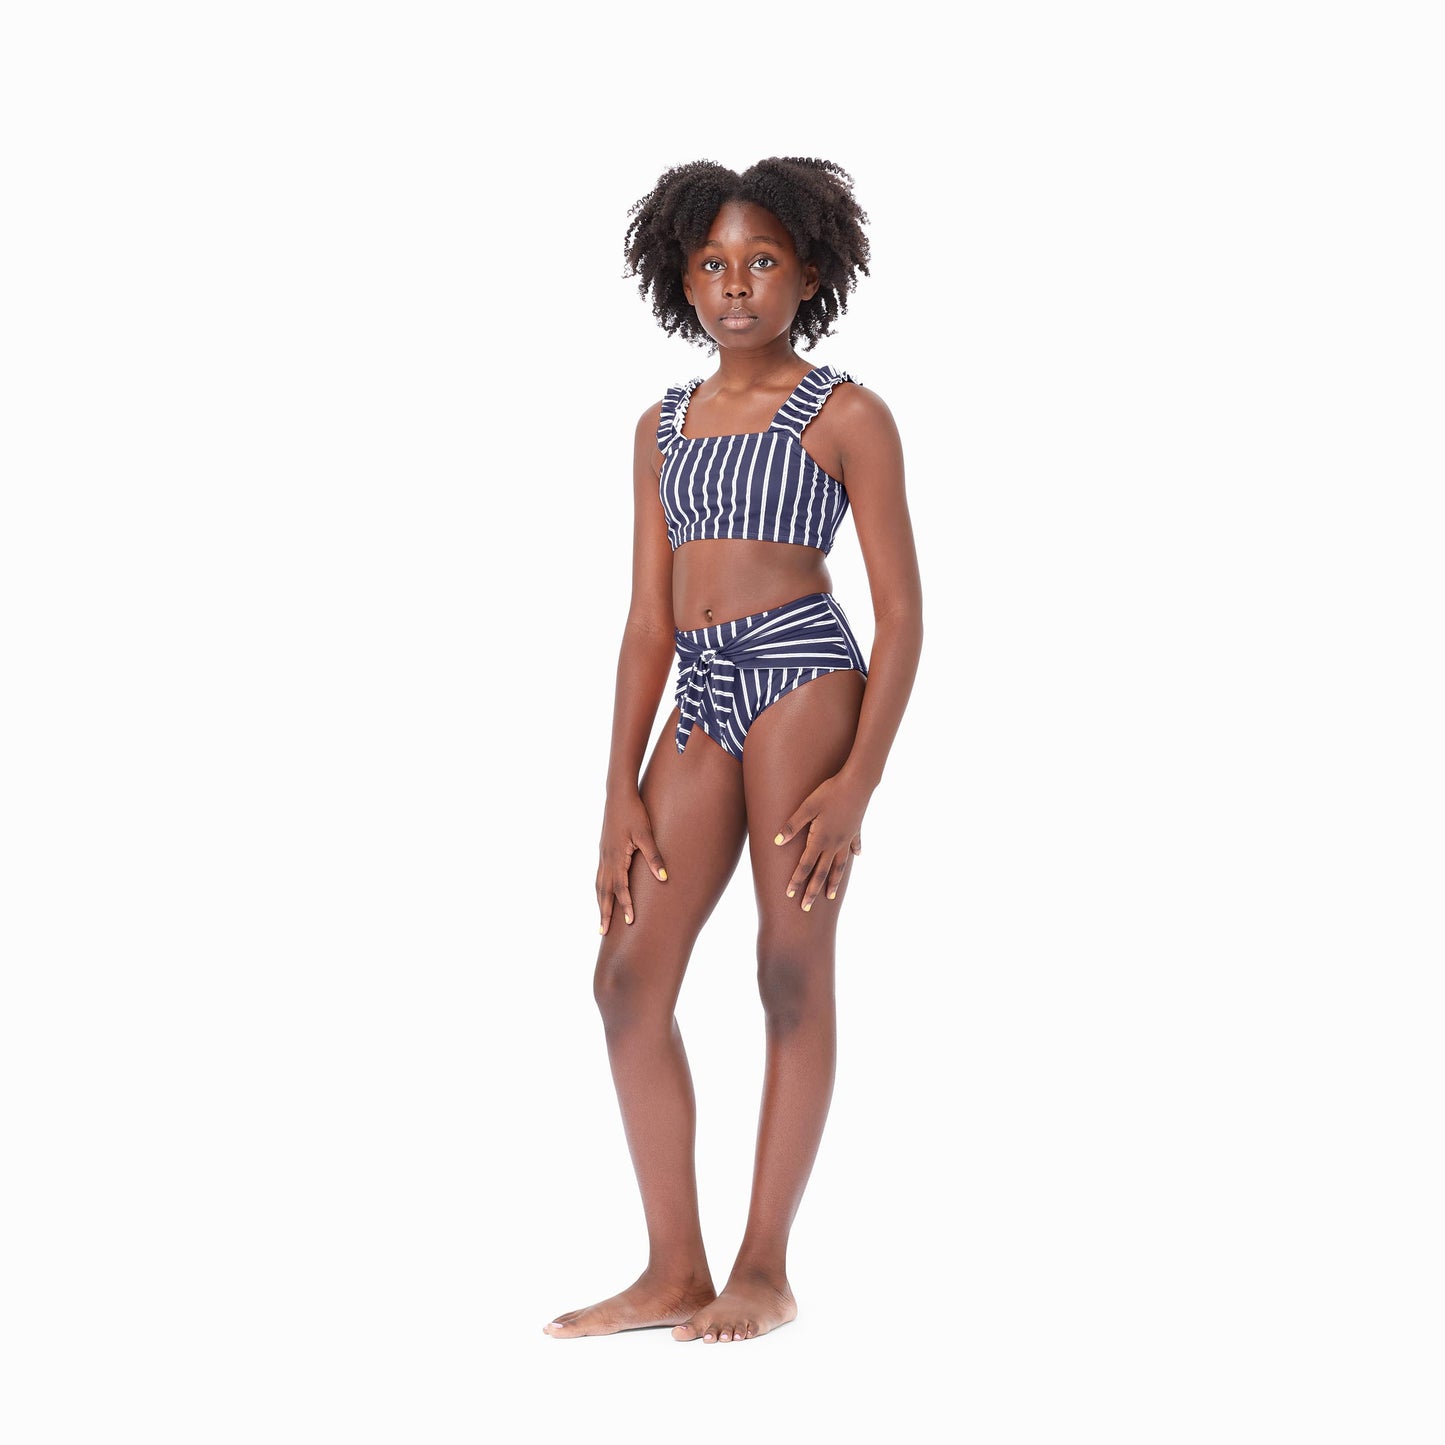 Girl wearing navy two-piece swimsuit with white stripes and bow